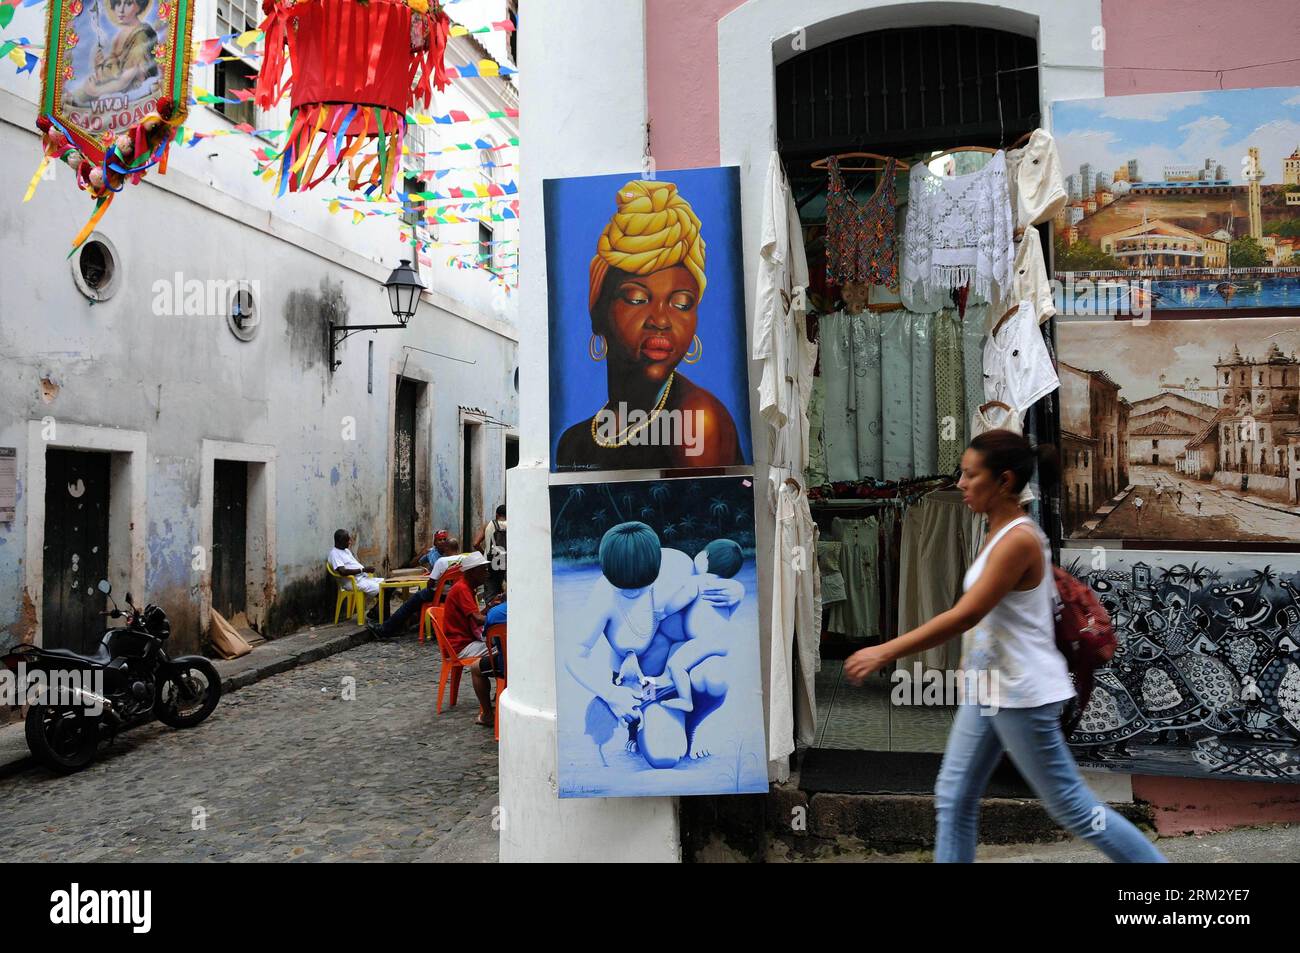 Bildnummer: 59917547  Datum: 28.06.2013  Copyright: imago/Xinhua BAHIA, June 28, 2013 - A woman walks in front of pictures and clothes on a street in the neighborhood of Pelourinho, in Salvador de Bahia, Bahia state, Brazil, on June 28, 2013. The neighborhood of Pelourinho is located in the historical center of Salvador de Bahia and part of the historical heritage of the UNESCO. Bahia will be the venue of third and fourth place match of the FIFA s Confederations Cup Brazil 2013. (Xinhua/Nicolas Celaya) (itm) (SP)BRAZIL-BAHIA-CONFEDERATIONS-DAILY LIFE PUBLICATIONxNOTxINxCHN xas x0x 2013 quer Stock Photo